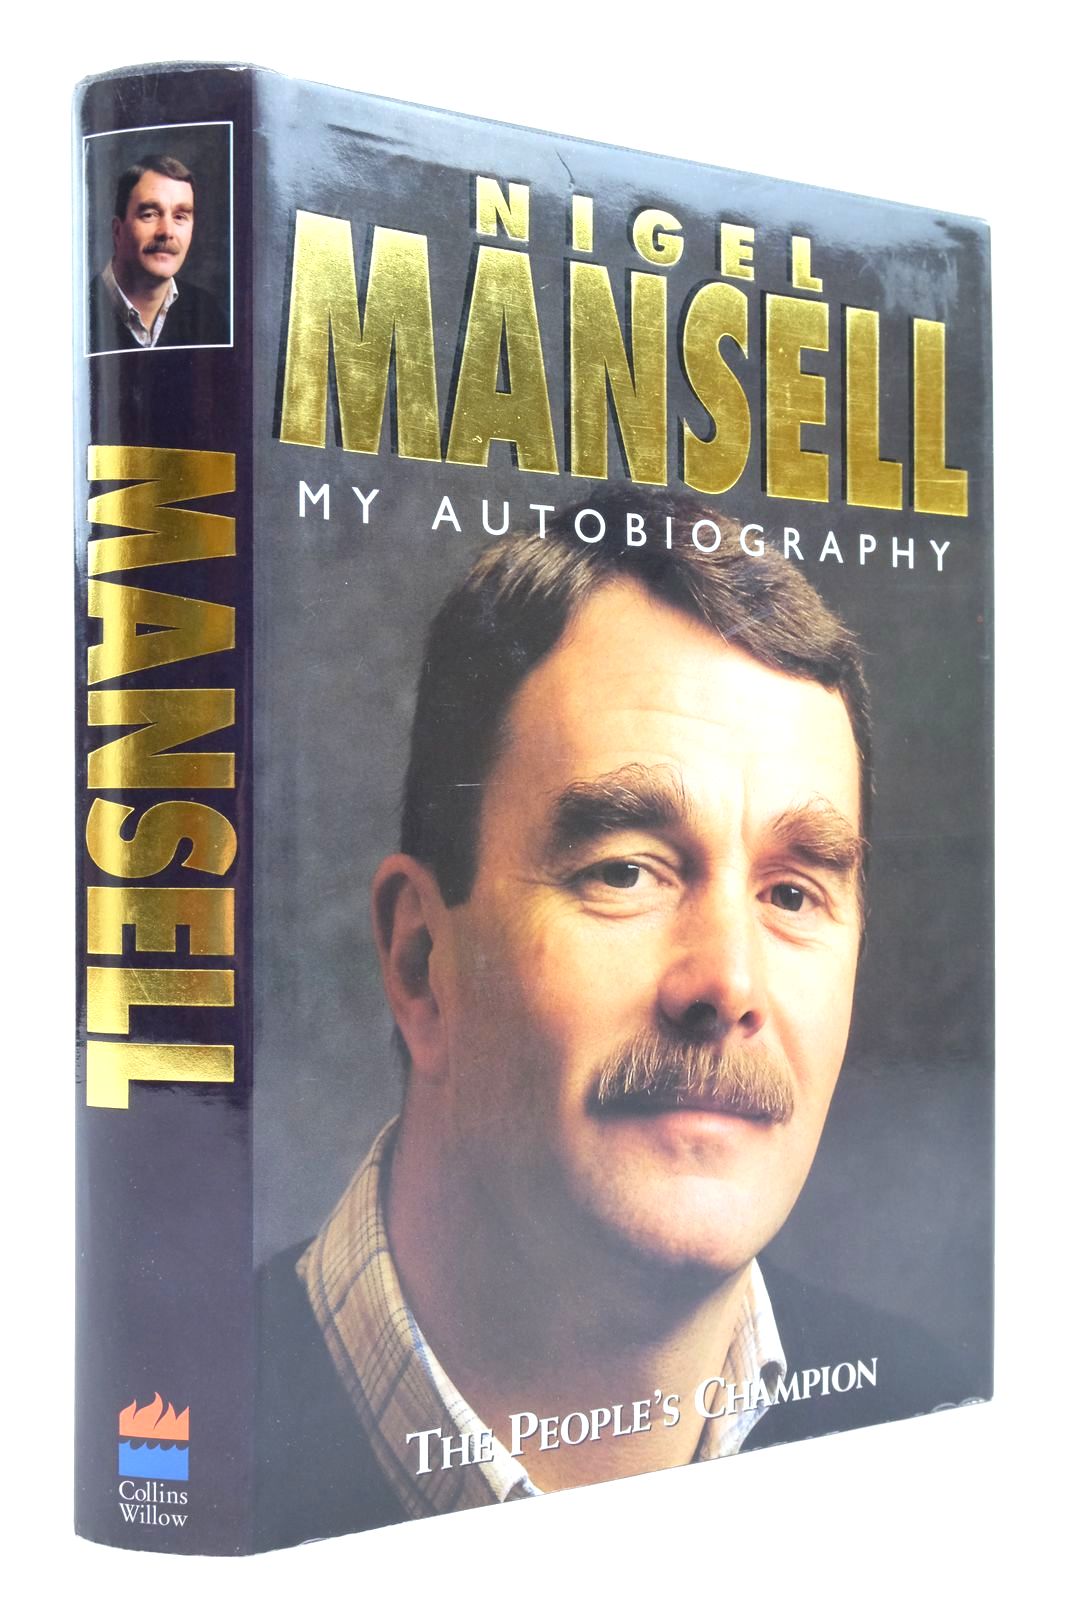 Photo of NIGEL MANSELL: MY AUTOBIOGRAPHY- Stock Number: 2137666